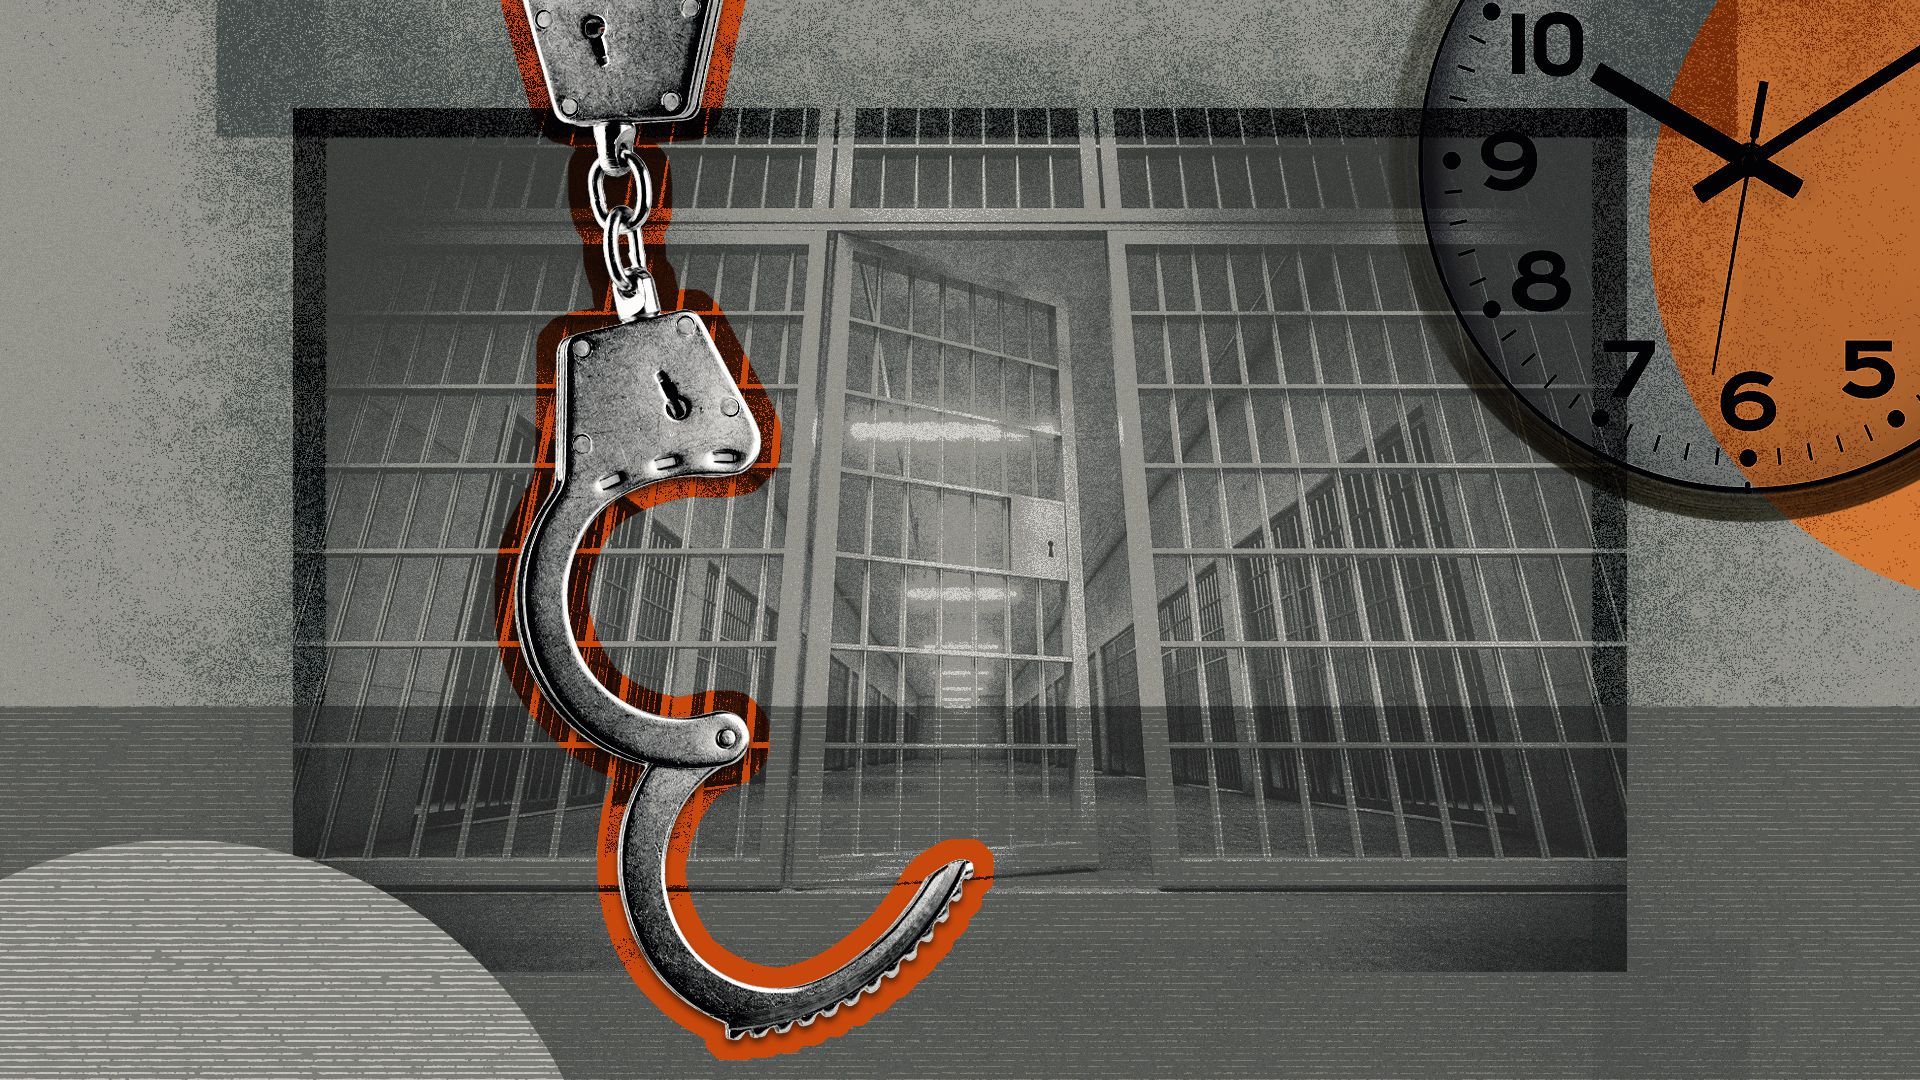 Photo illustration of an open jail cell door, unlocked handcuffs, and a clock.